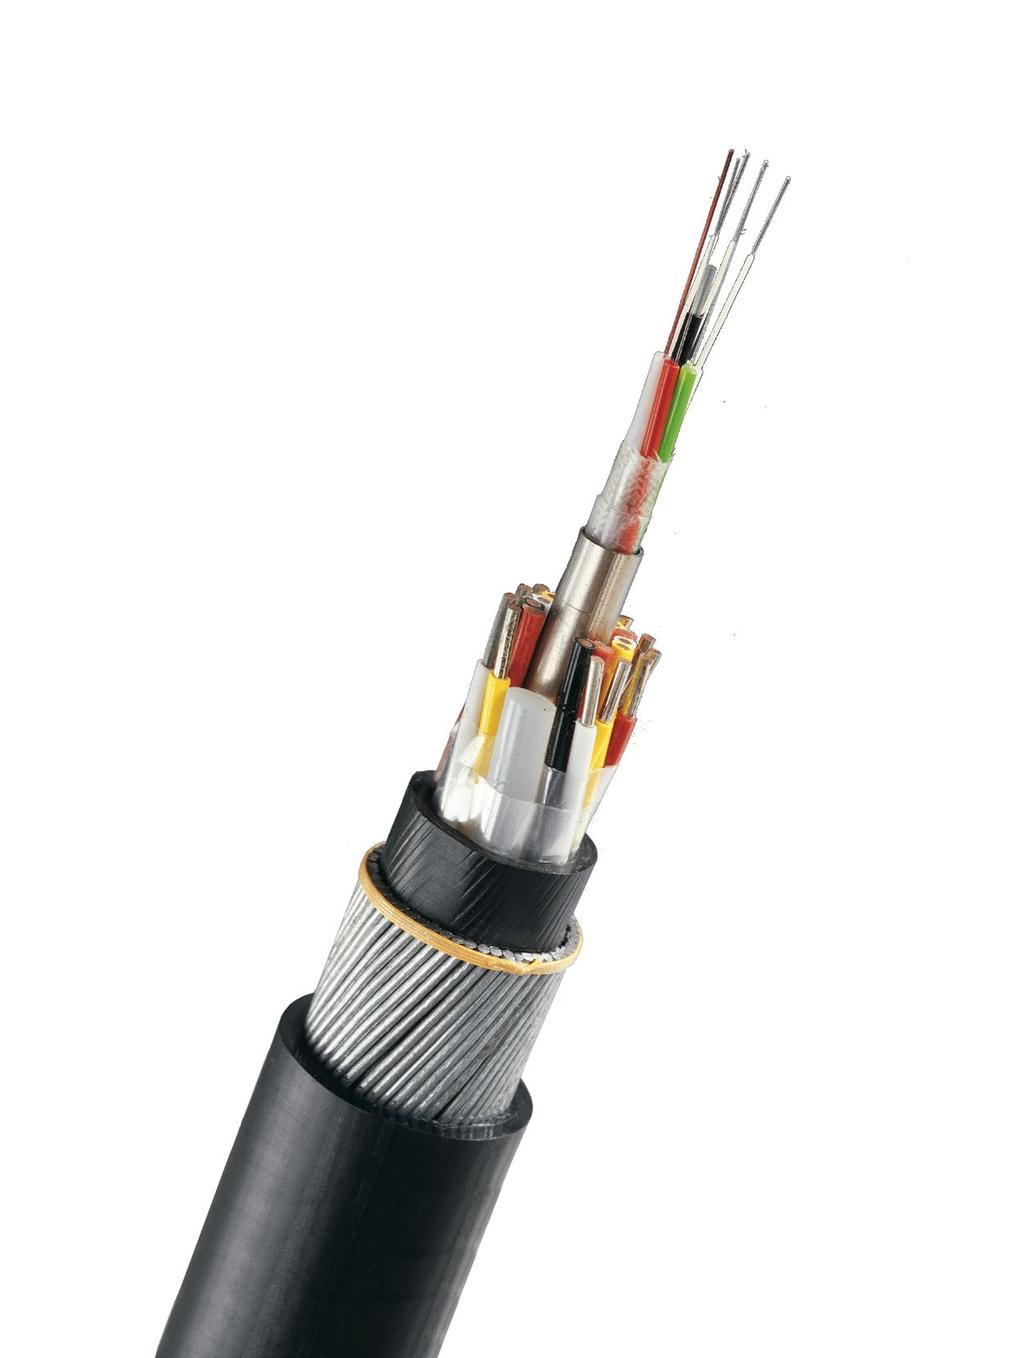 SPECIAL CABLES The continuous technological evolution led to an increase of the demand of customized products fulfilling specific requests.